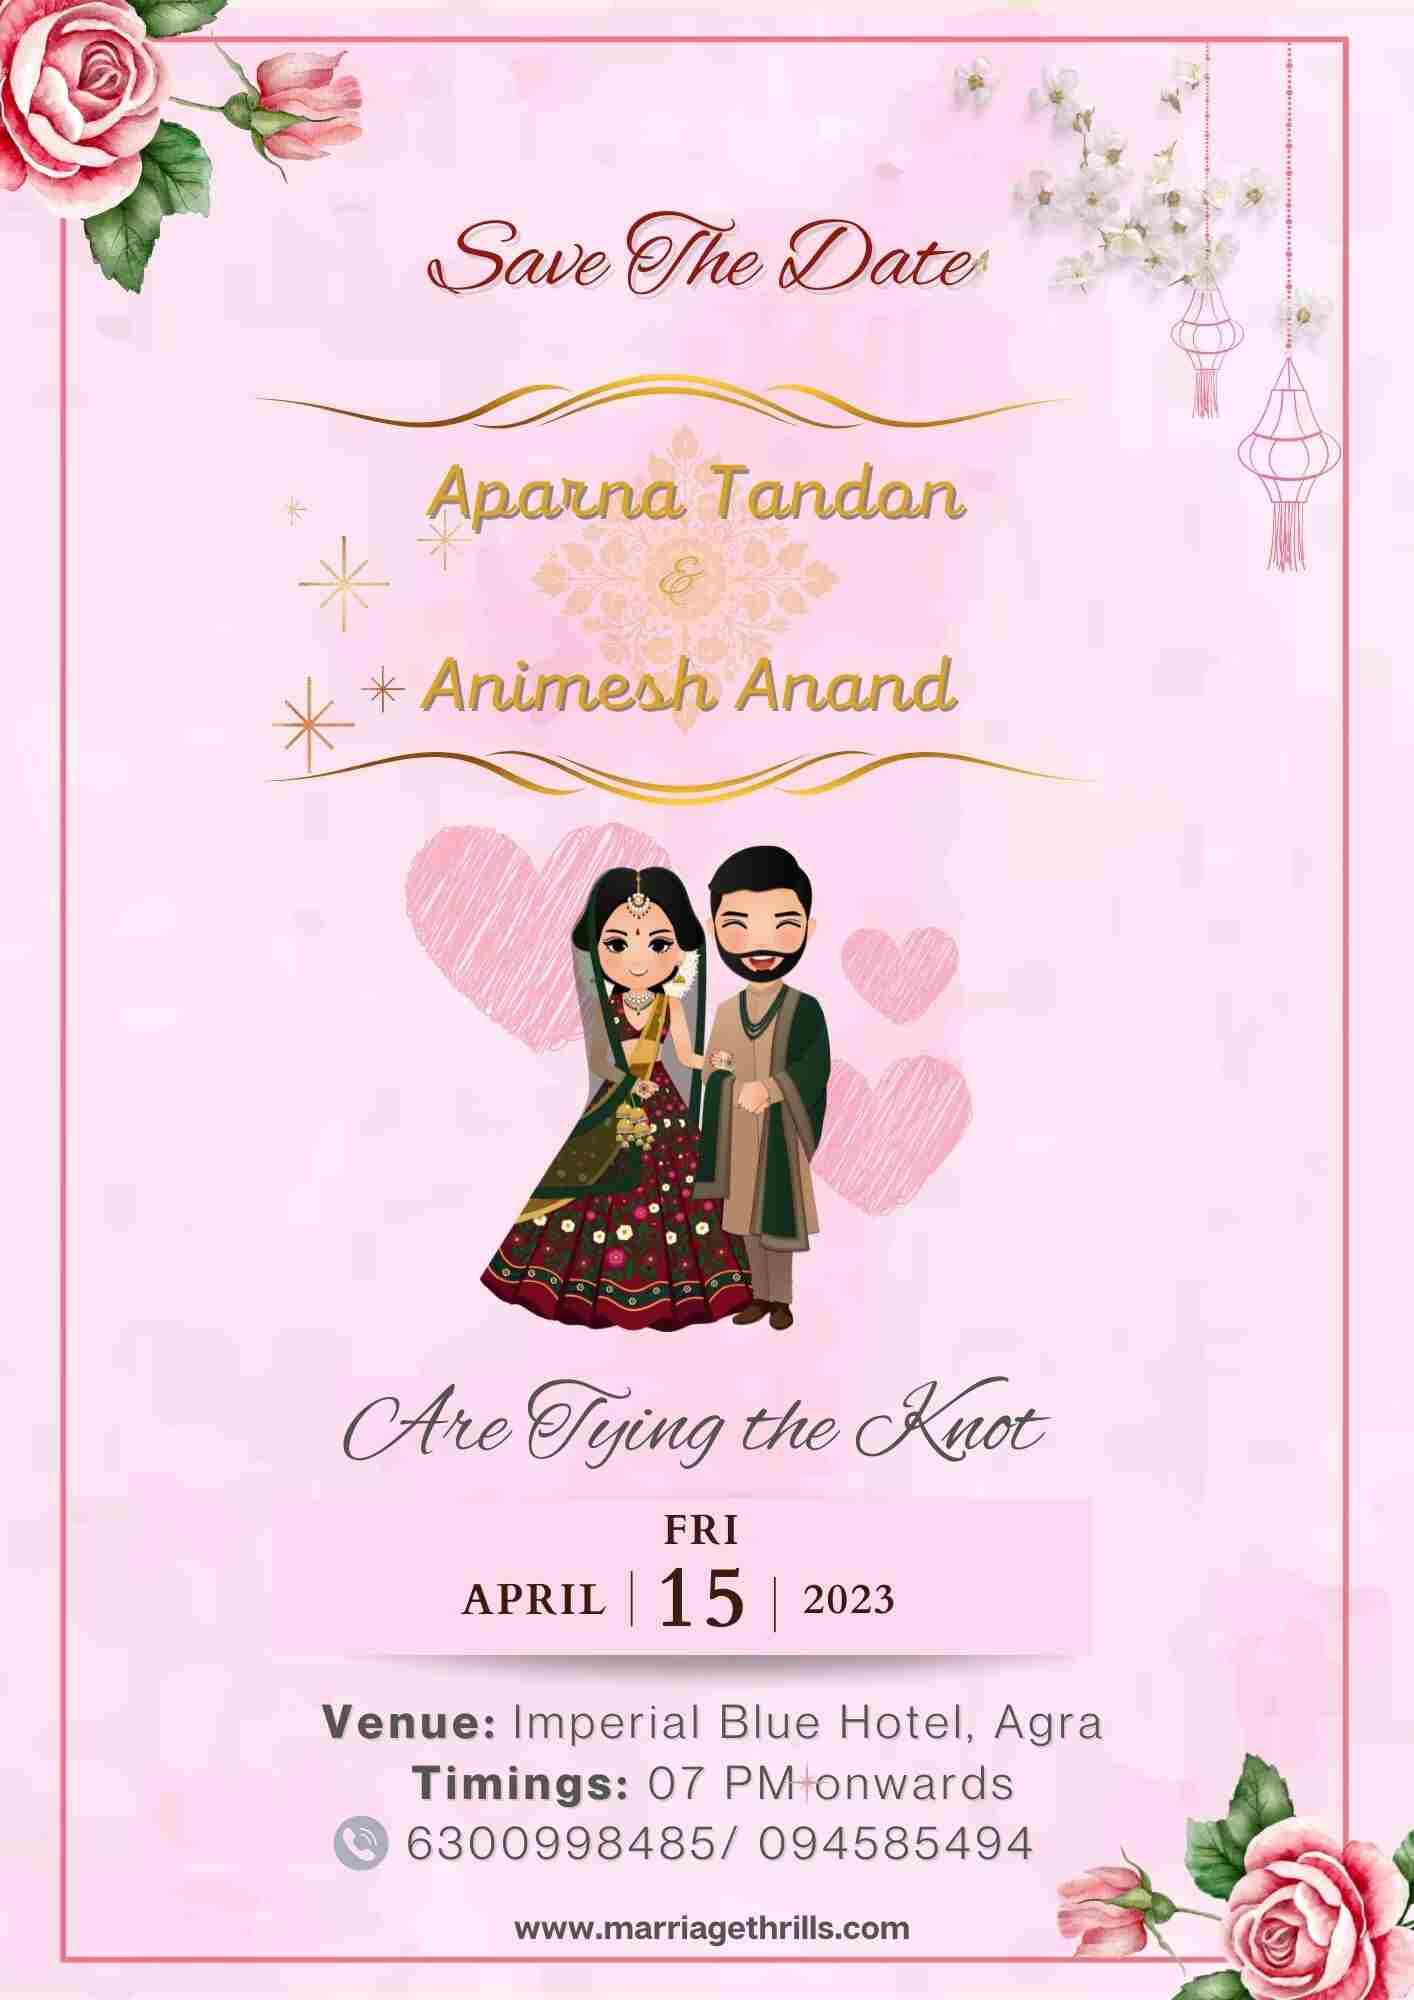 save-the-date-beautiful-template-marriage-thrills